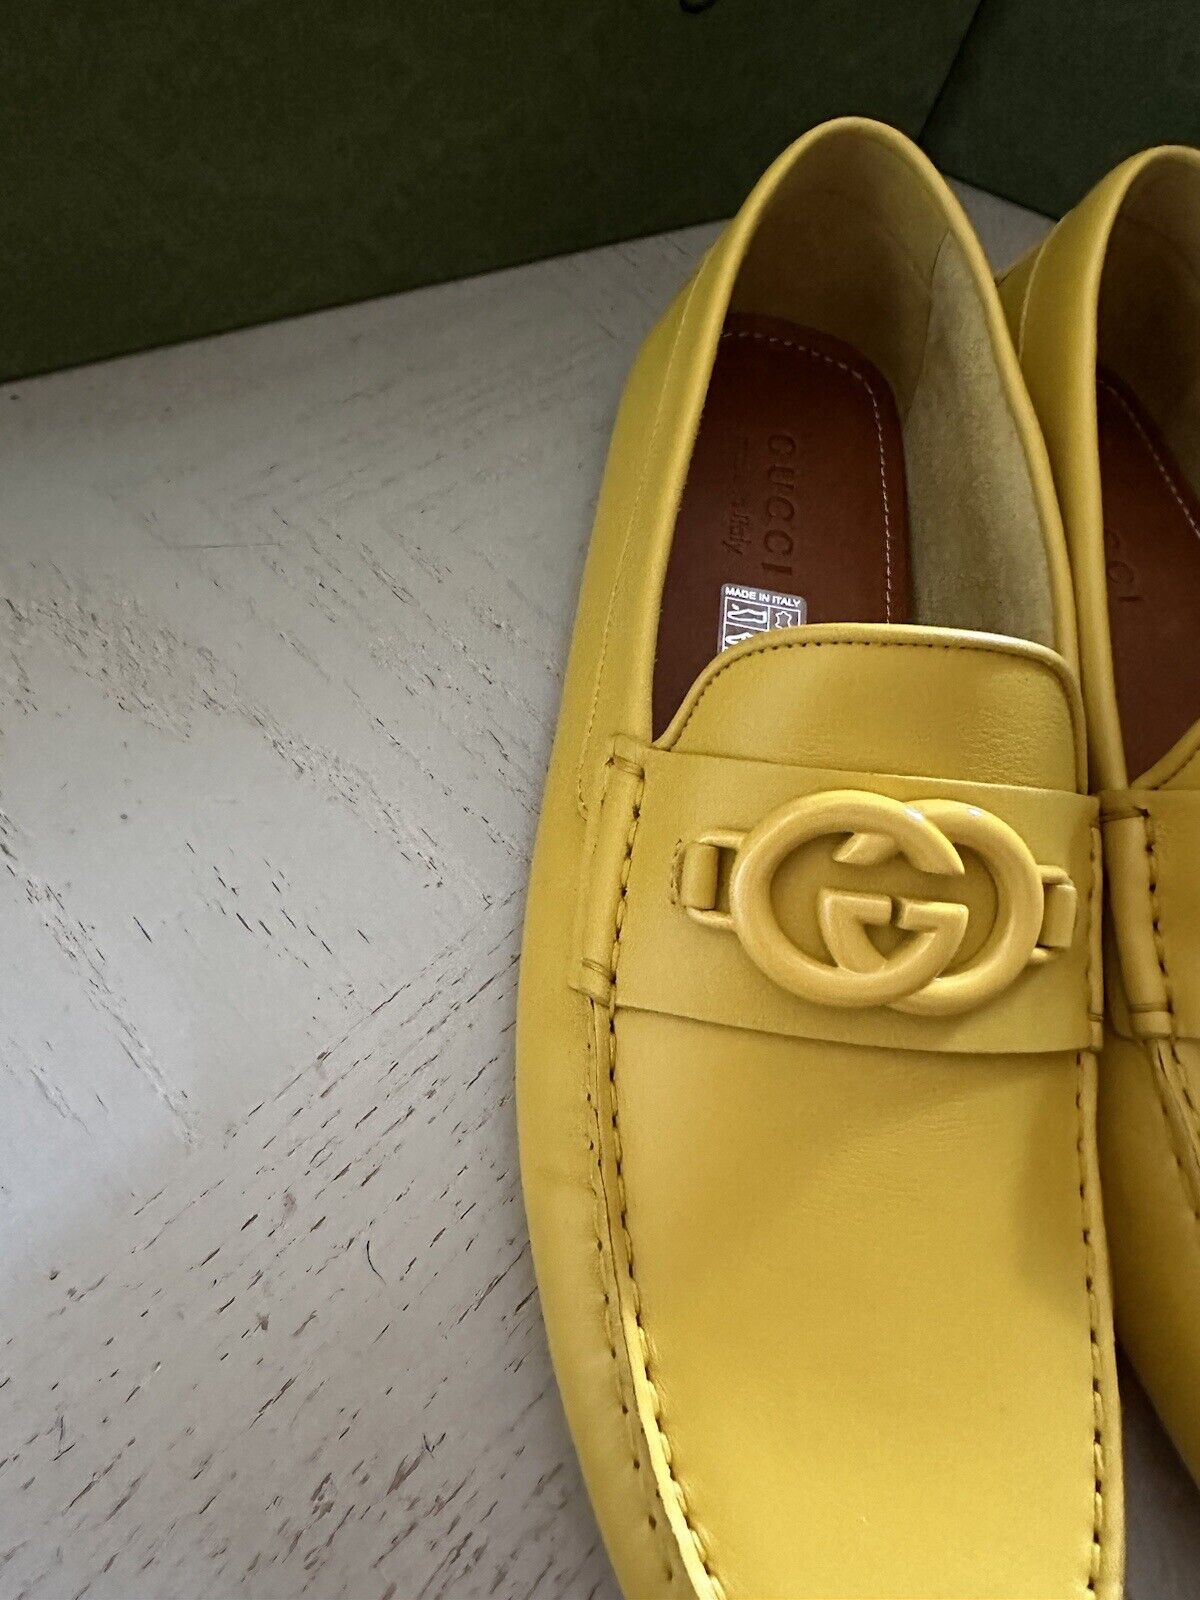 New Gucci Men GG Leather Moccasin Driver Loafers Shoes Yellow 10 US/9 UK 692379